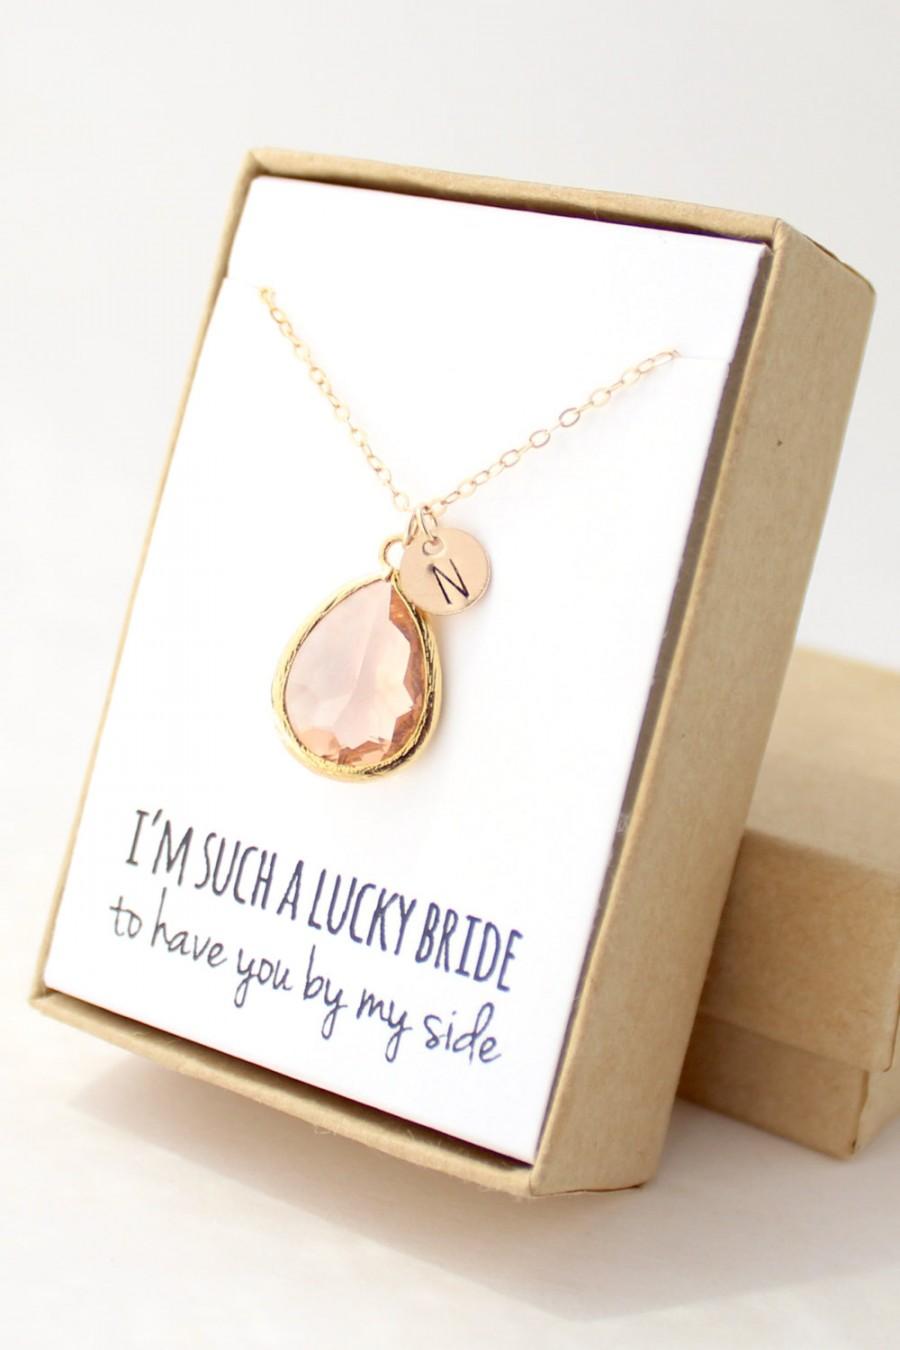 Wedding - Peach Champagne / Gold Teardrop Necklace - Peach Champagne Bridesmaid Necklace - Bridesmaid Gift Jewelry - Peach and Gold Necklace - NB1